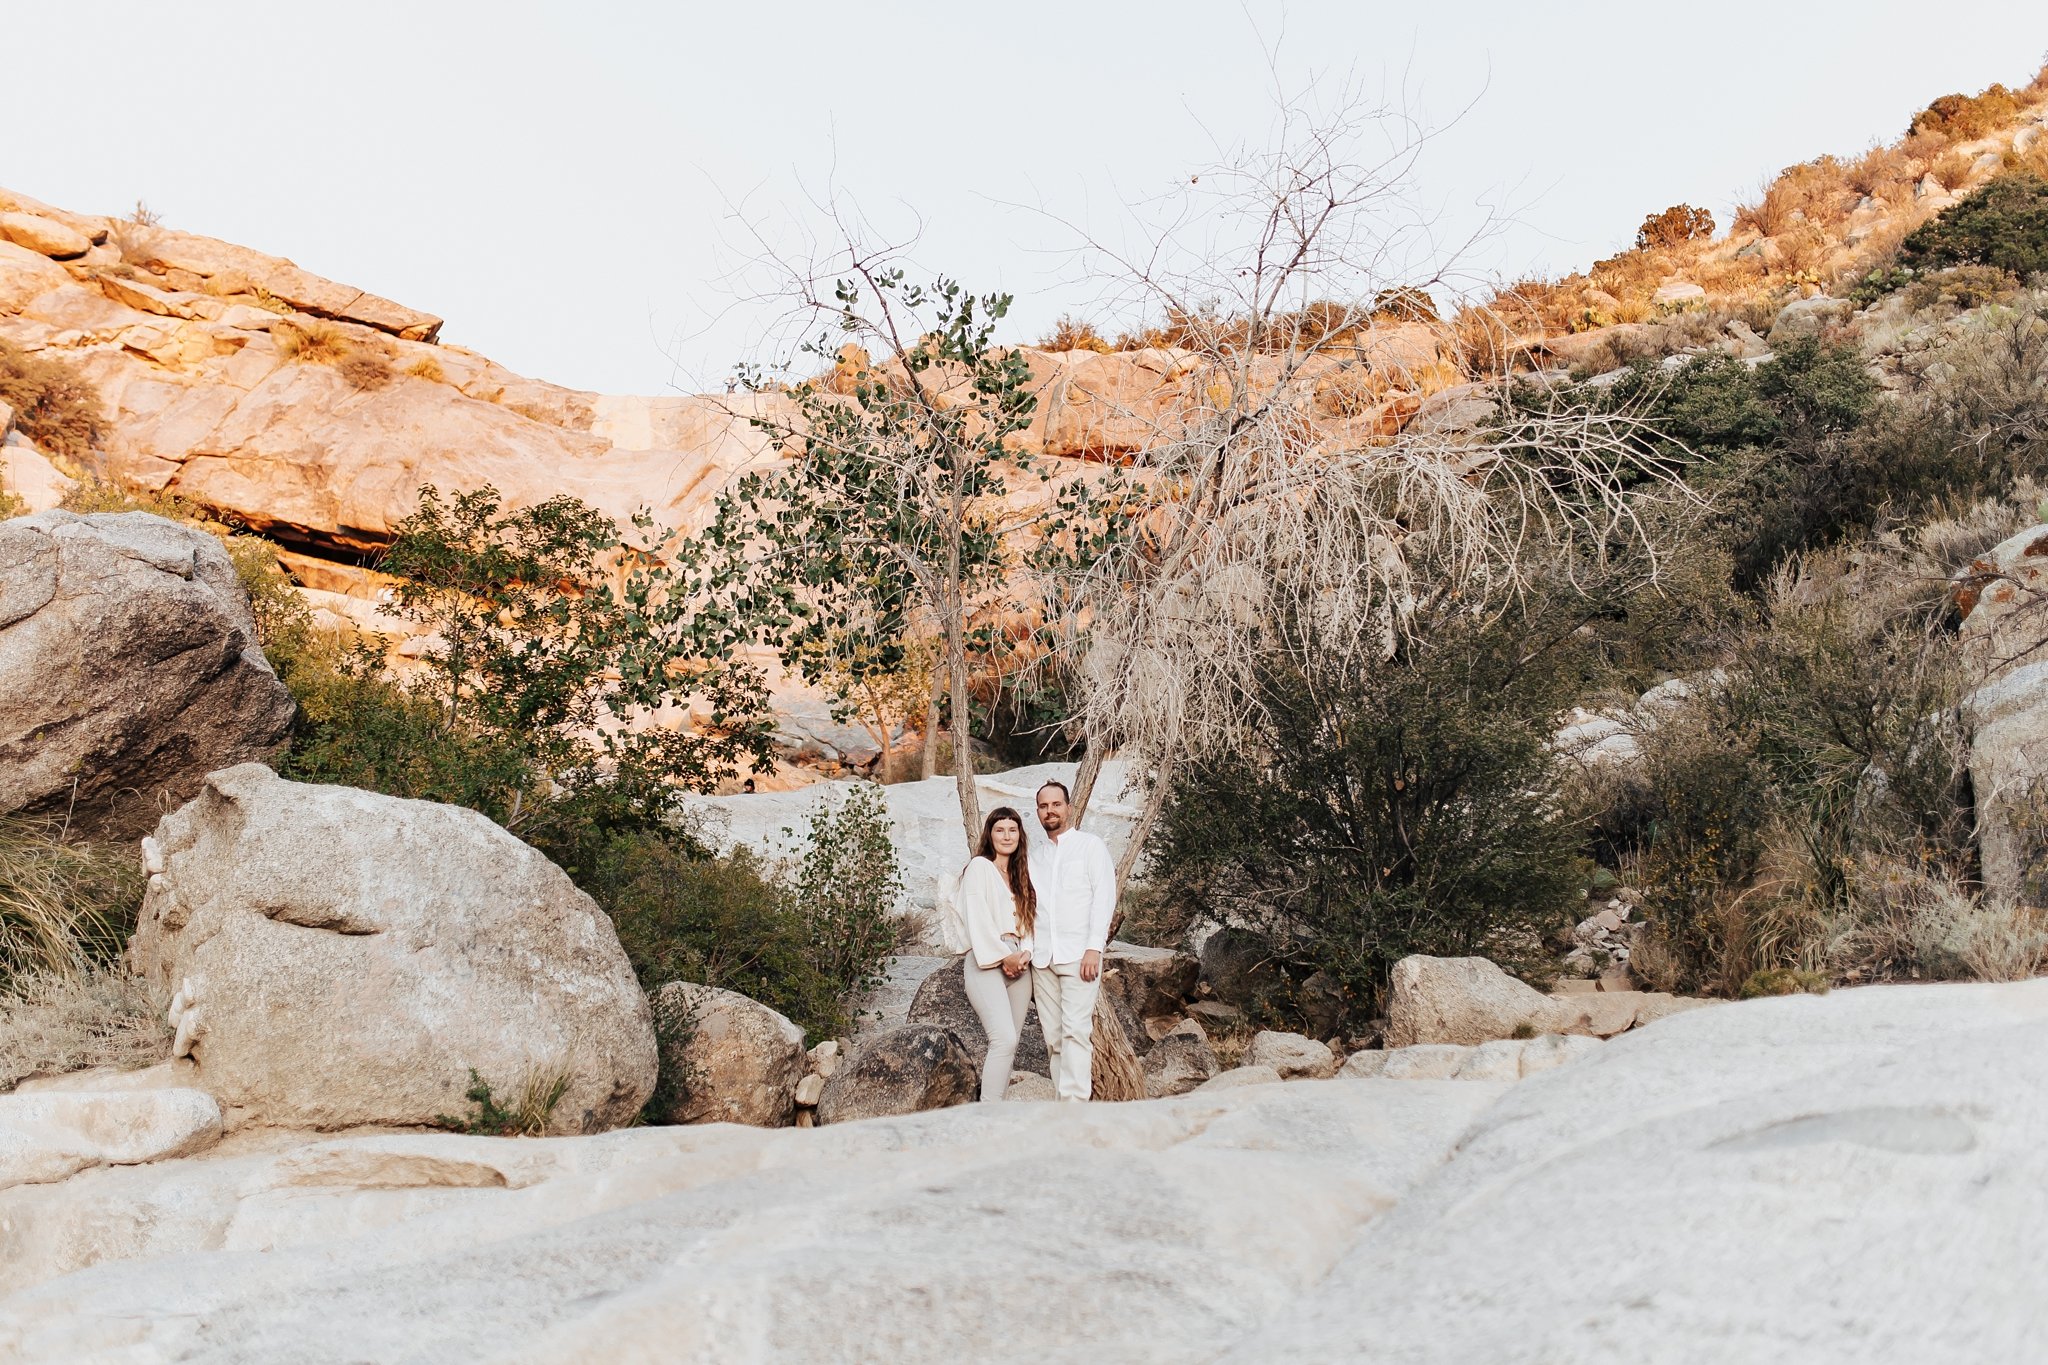 Alicia+lucia+photography+-+albuquerque+wedding+photographer+-+santa+fe+wedding+photography+-+new+mexico+wedding+photographer+-+new+mexico+wedding+-+desert+engagement+-+foothills+engagement+-+mountain+engagement_0044.jpg